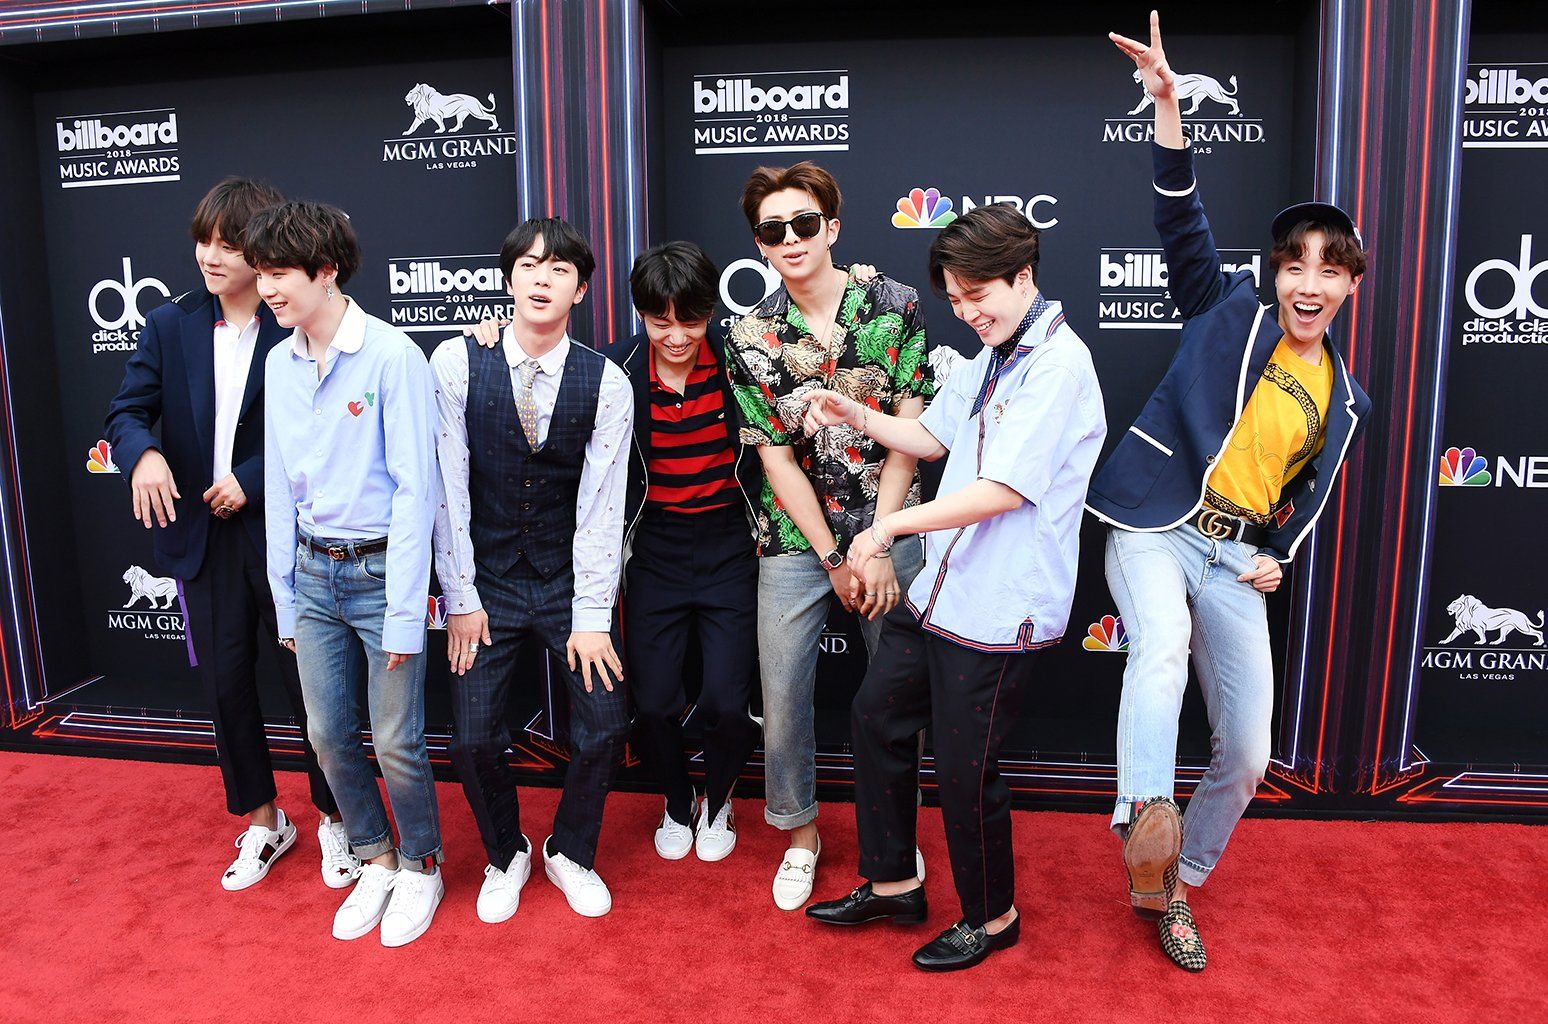 Picture] BTS at 2018 Billboard Music Awards Red Carpet [180520]